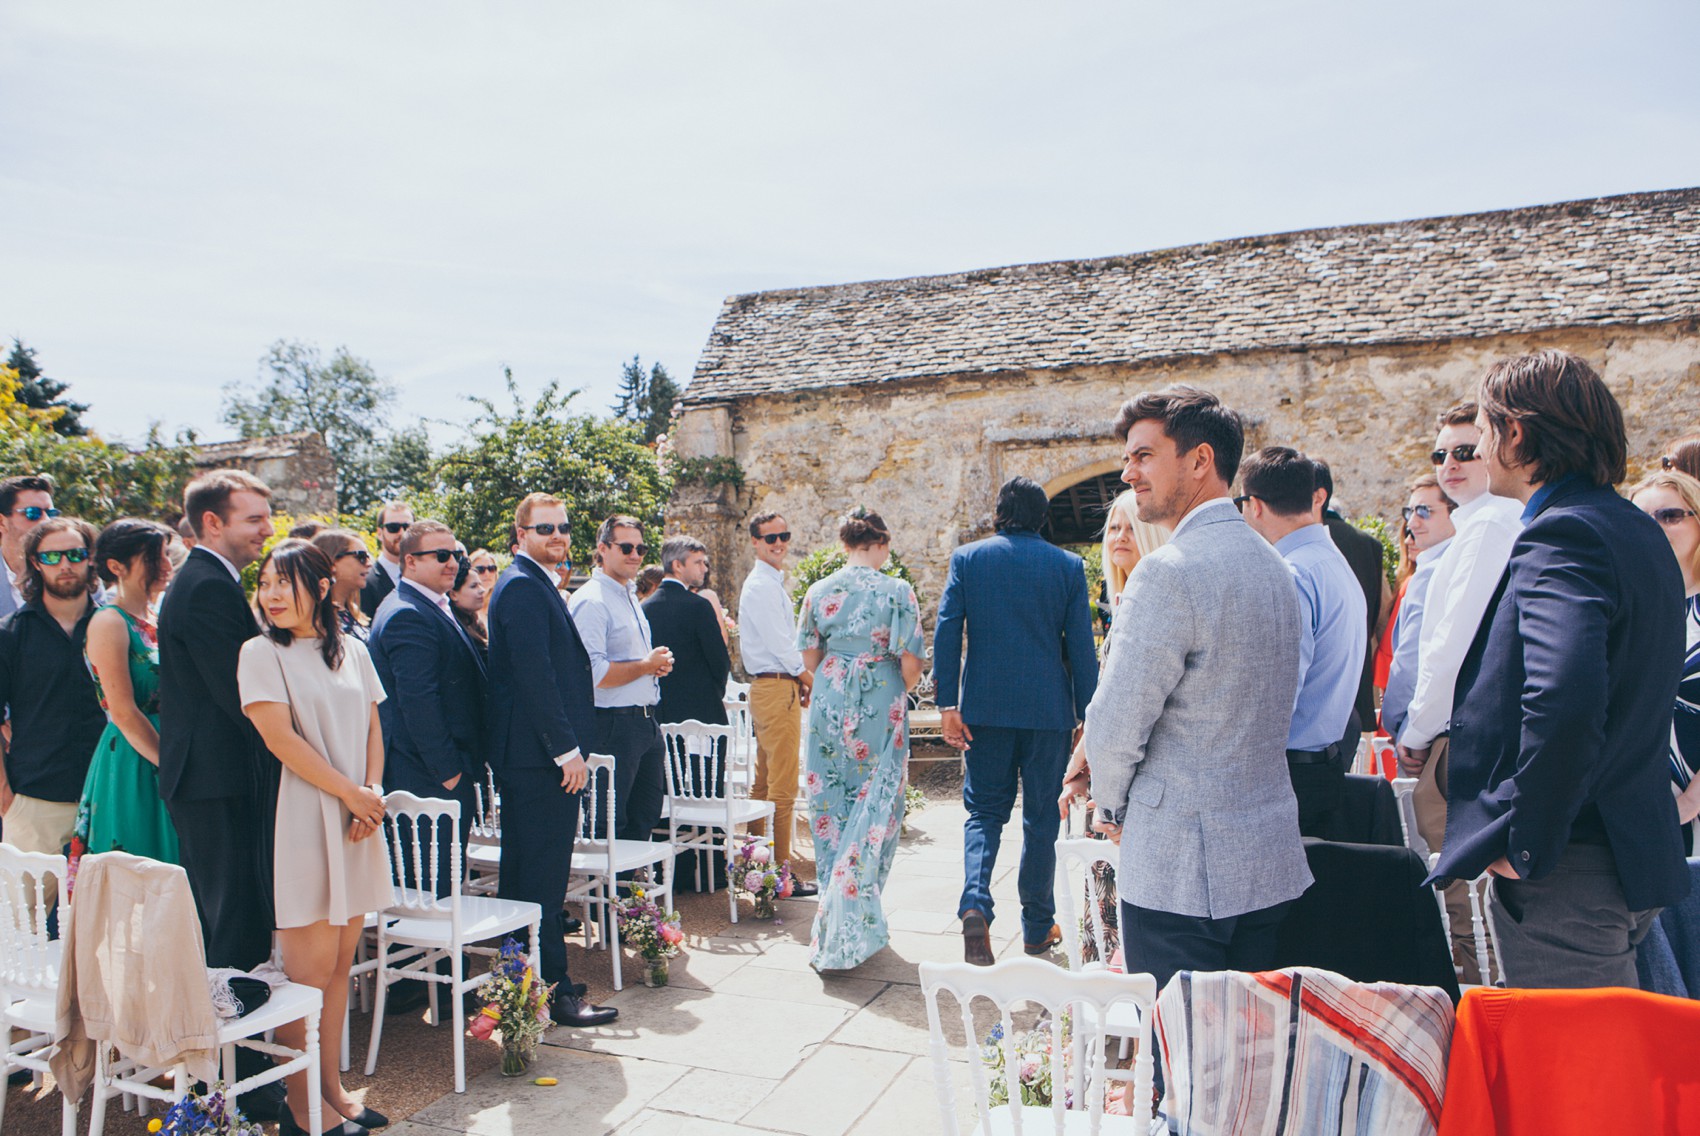 Charlie Brear dress colourful summer garden party wedding Caswell House  - A Timelessly Elegant Charlie Brear Dress for a Summer Garden Party Wedding at Caswell House